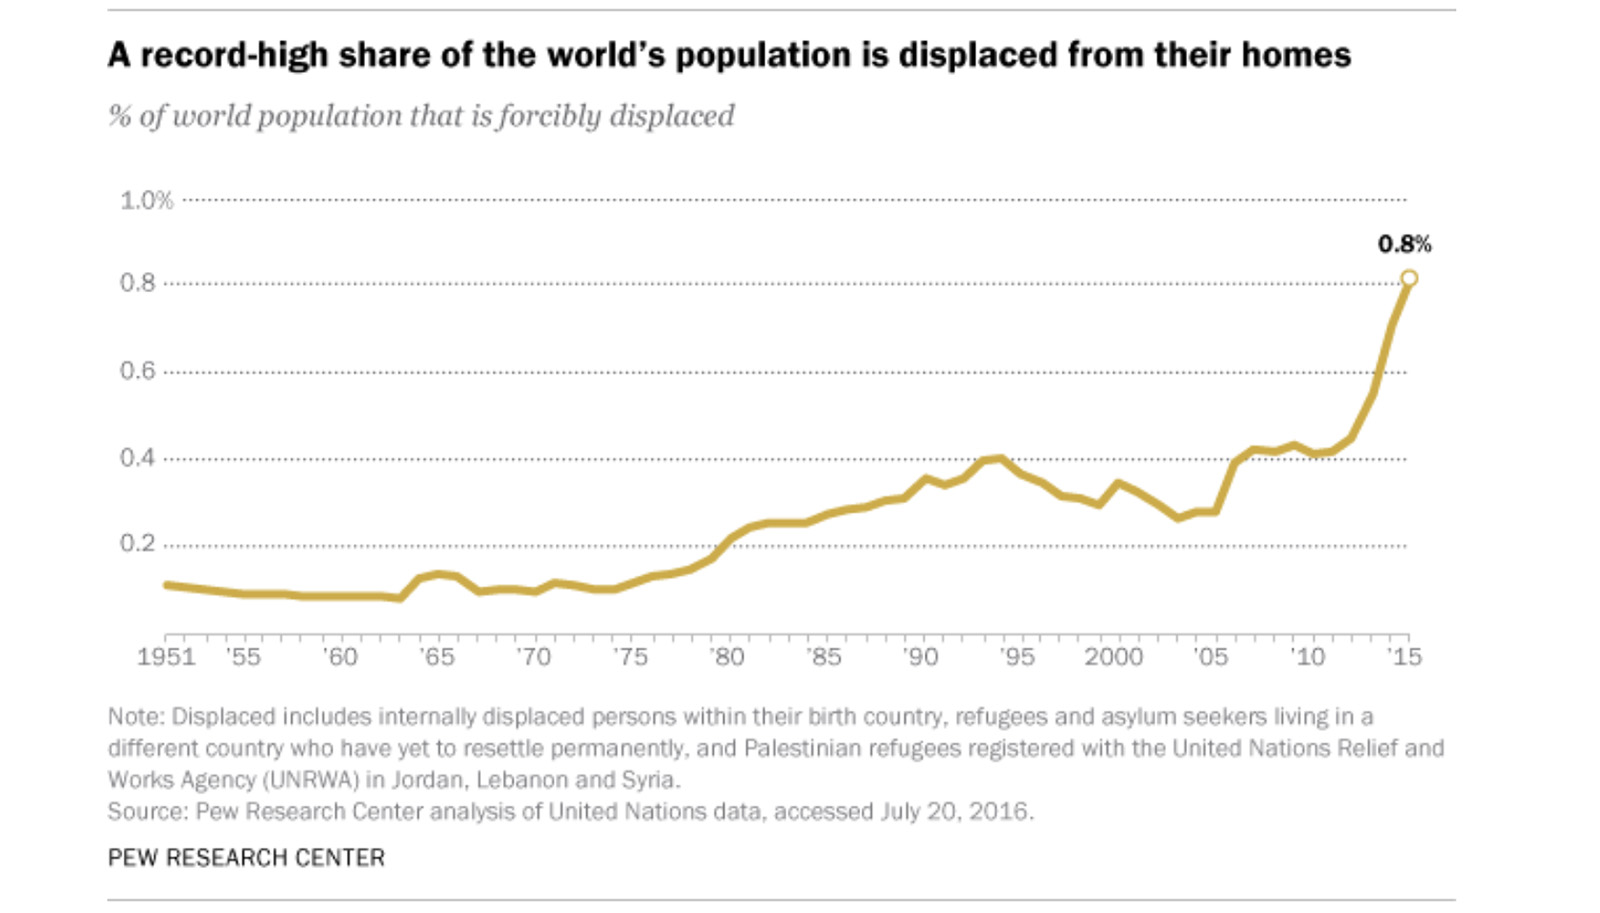 "A record-high share of the world’s population is displaced from their homes" (Graphic courtesy Pew Research Center)